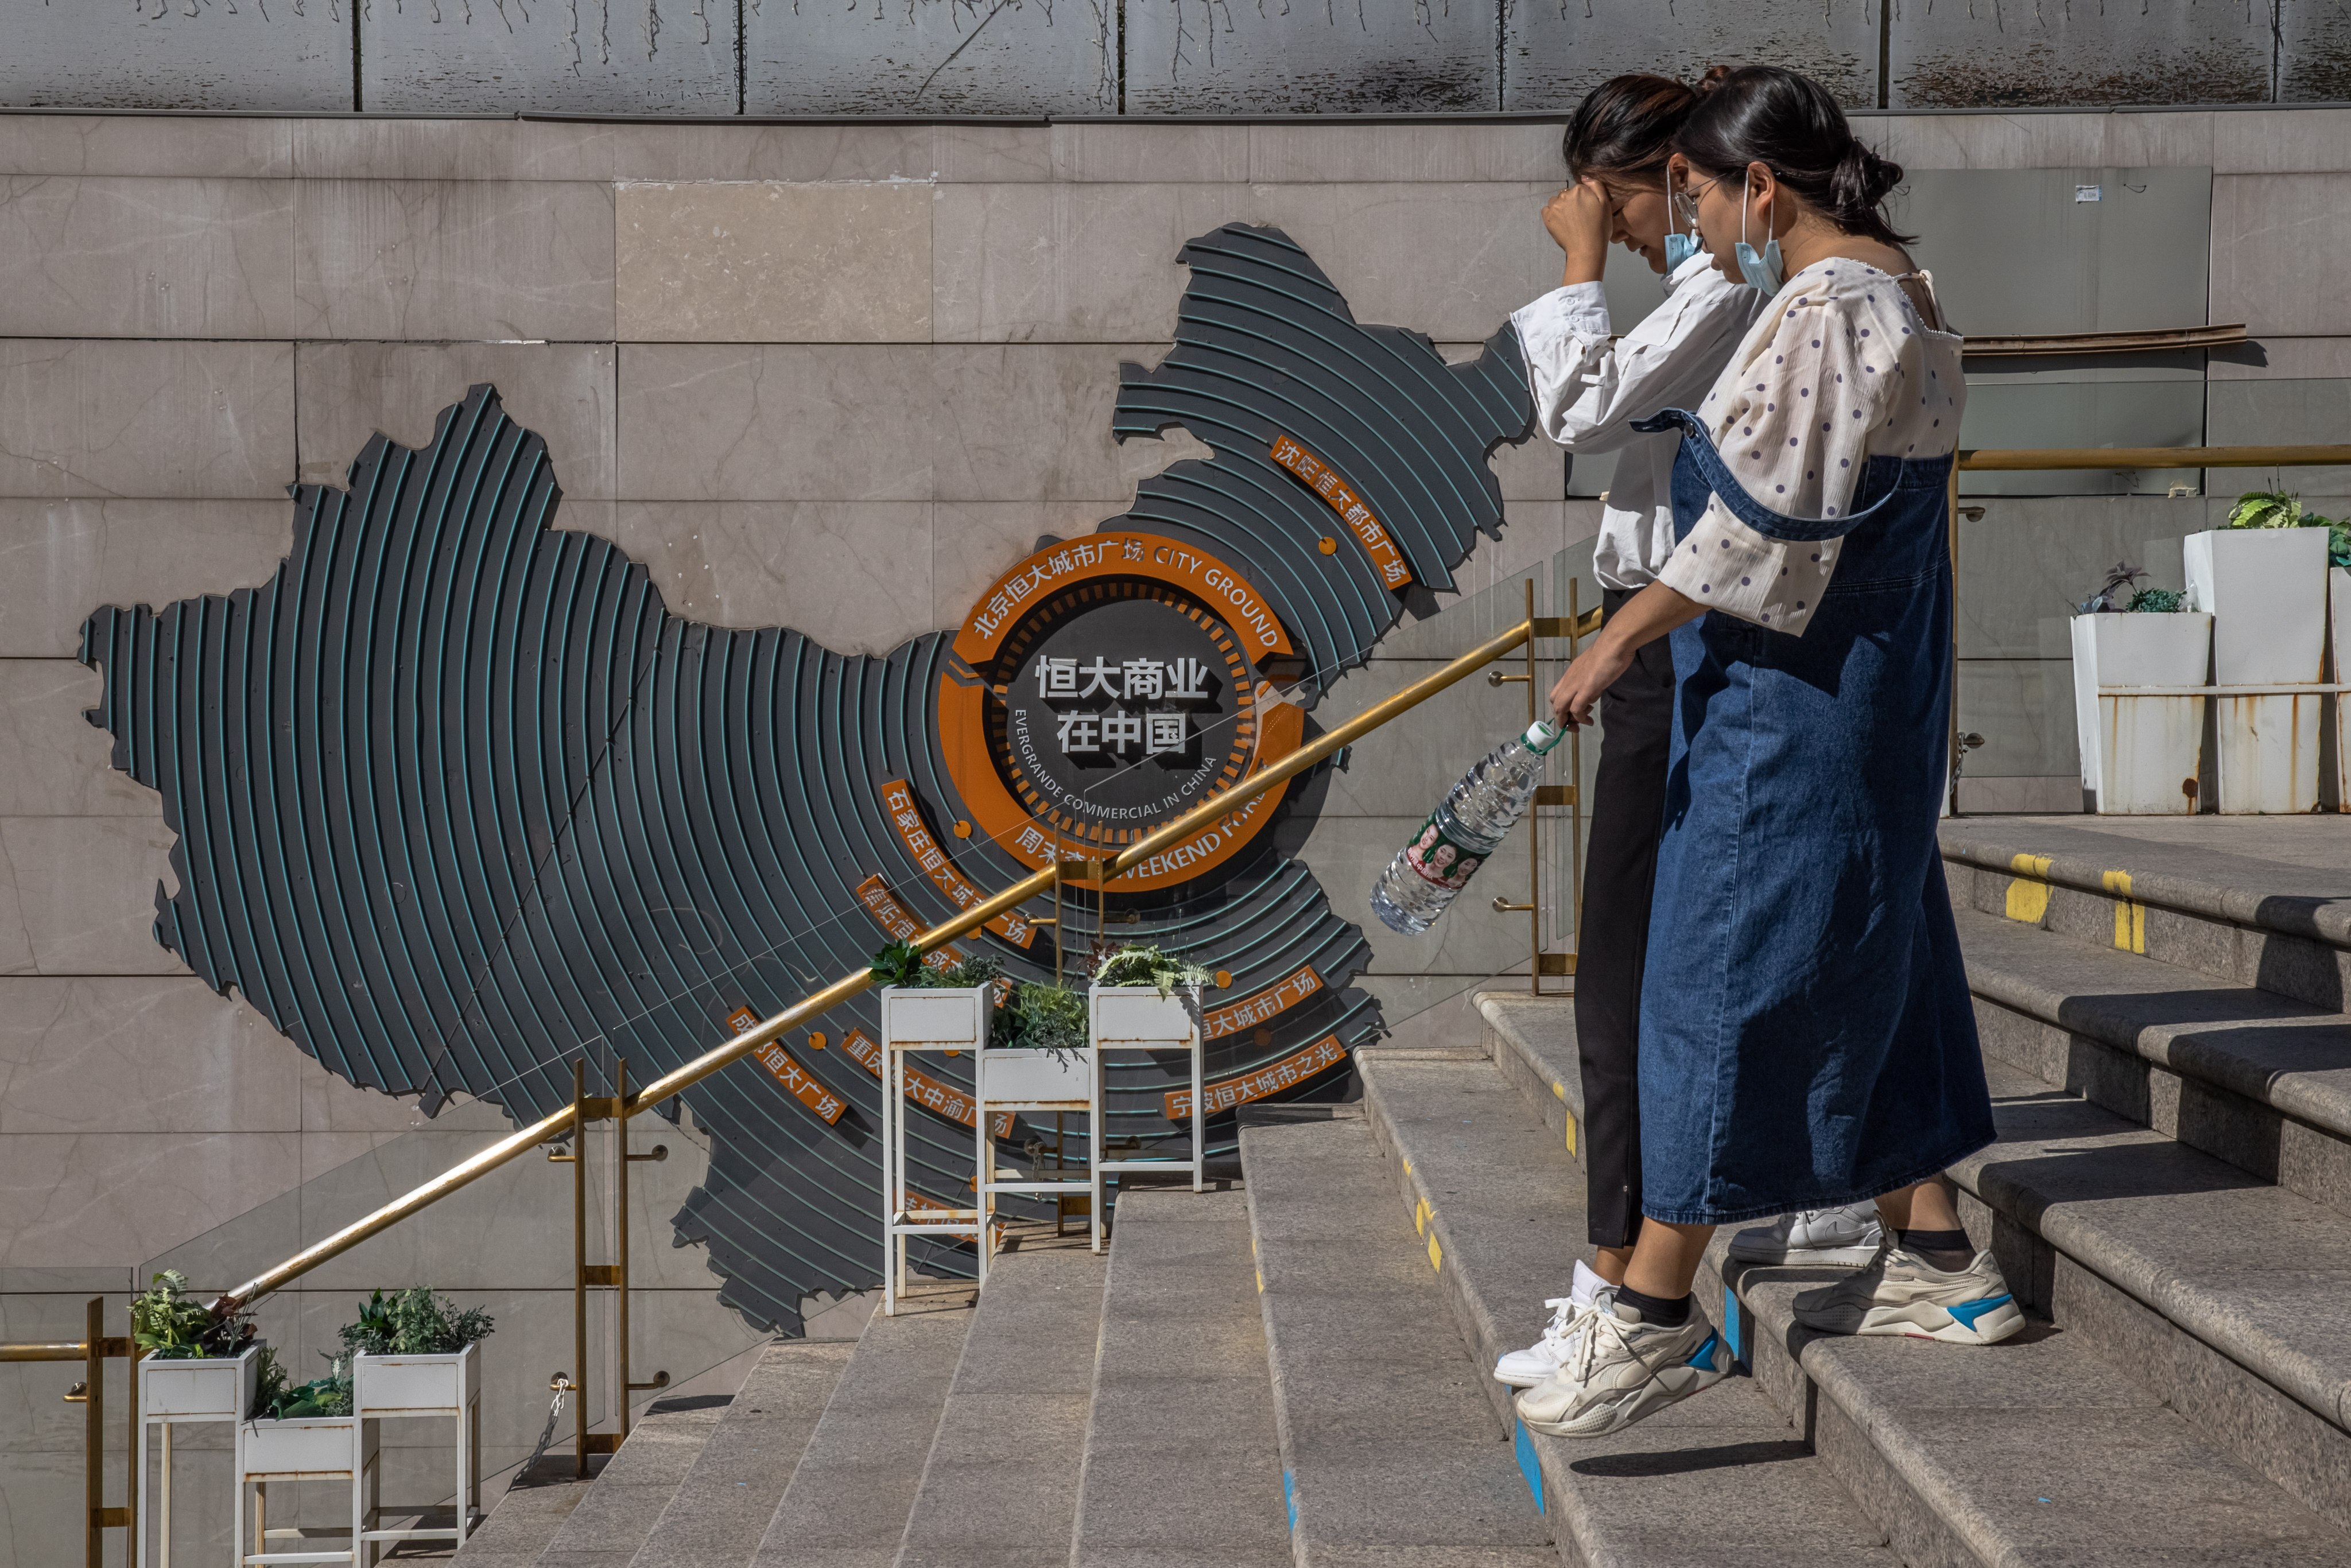 Women in Beijing walk past a map showing Evergrande’s commercial hubs in China, on September 22. Evergrande may have fallen from grace, but China’s scale bias will persist. Photo: EPA-EFE